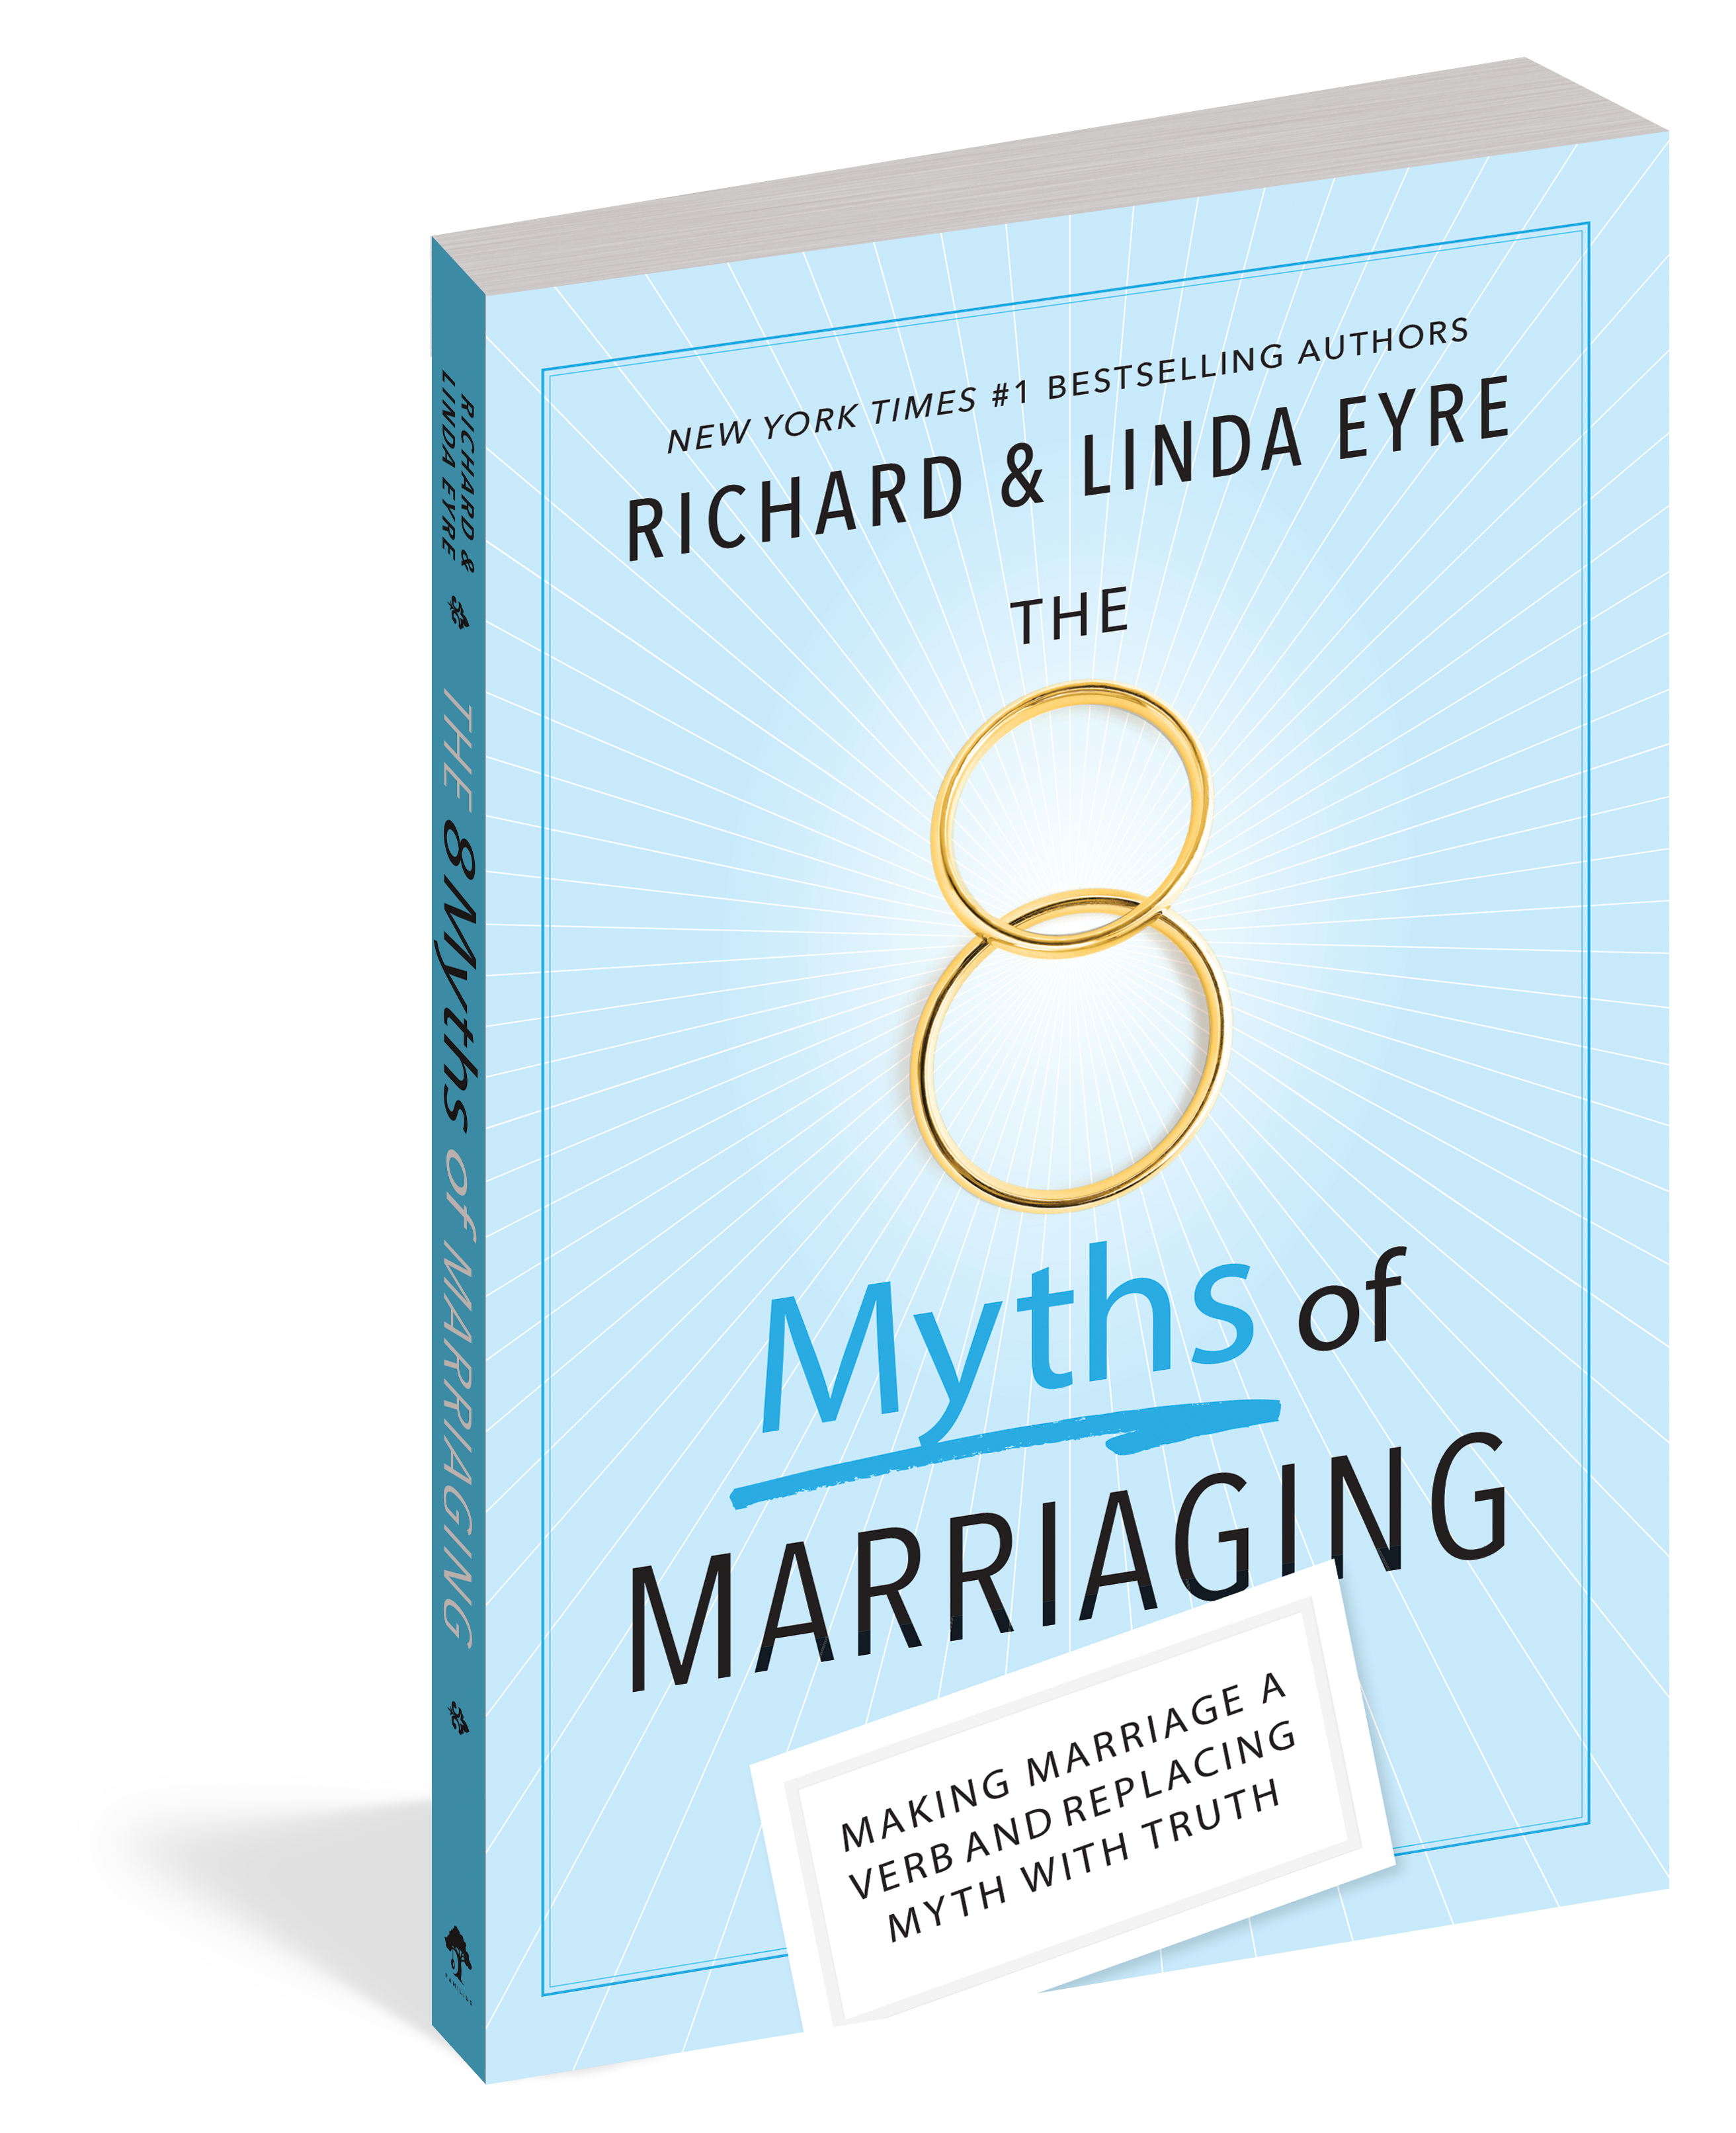 The cover of the book The 8 Myths of Marriaging.